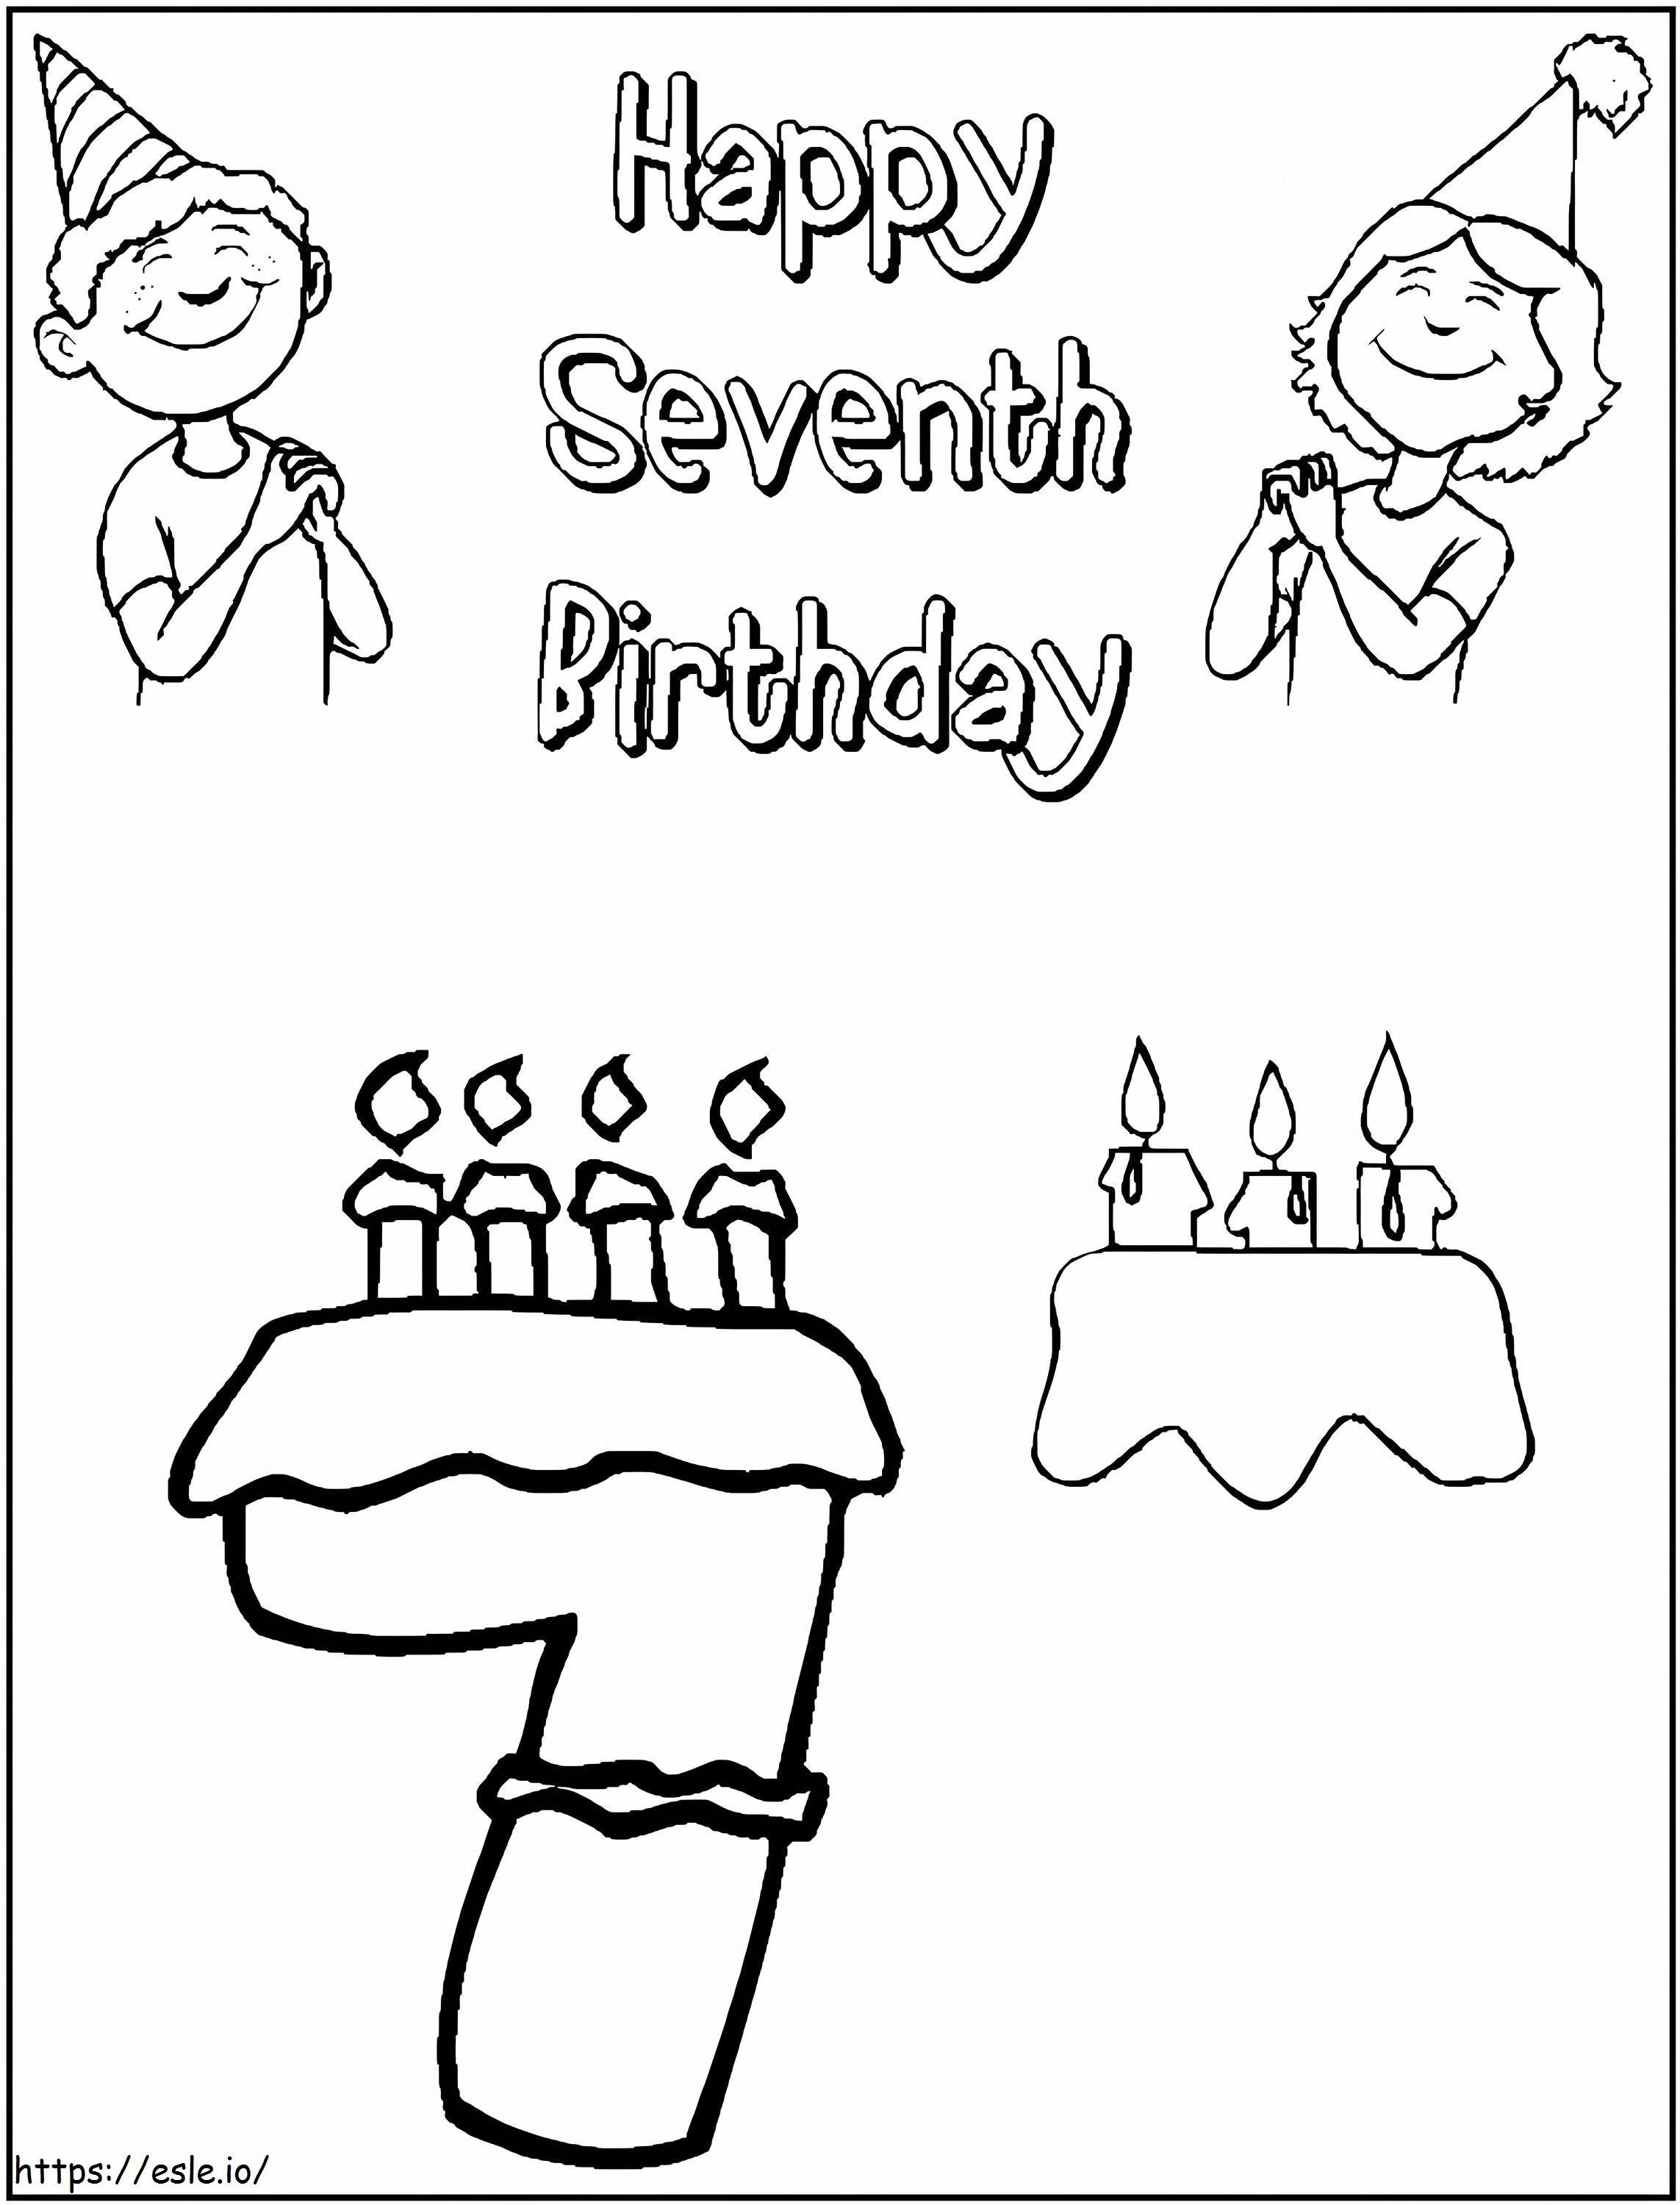 Dinosaur Birthday Coloringages Freerintable Colouring For Seventh Fantastic Image Inspirations coloring page